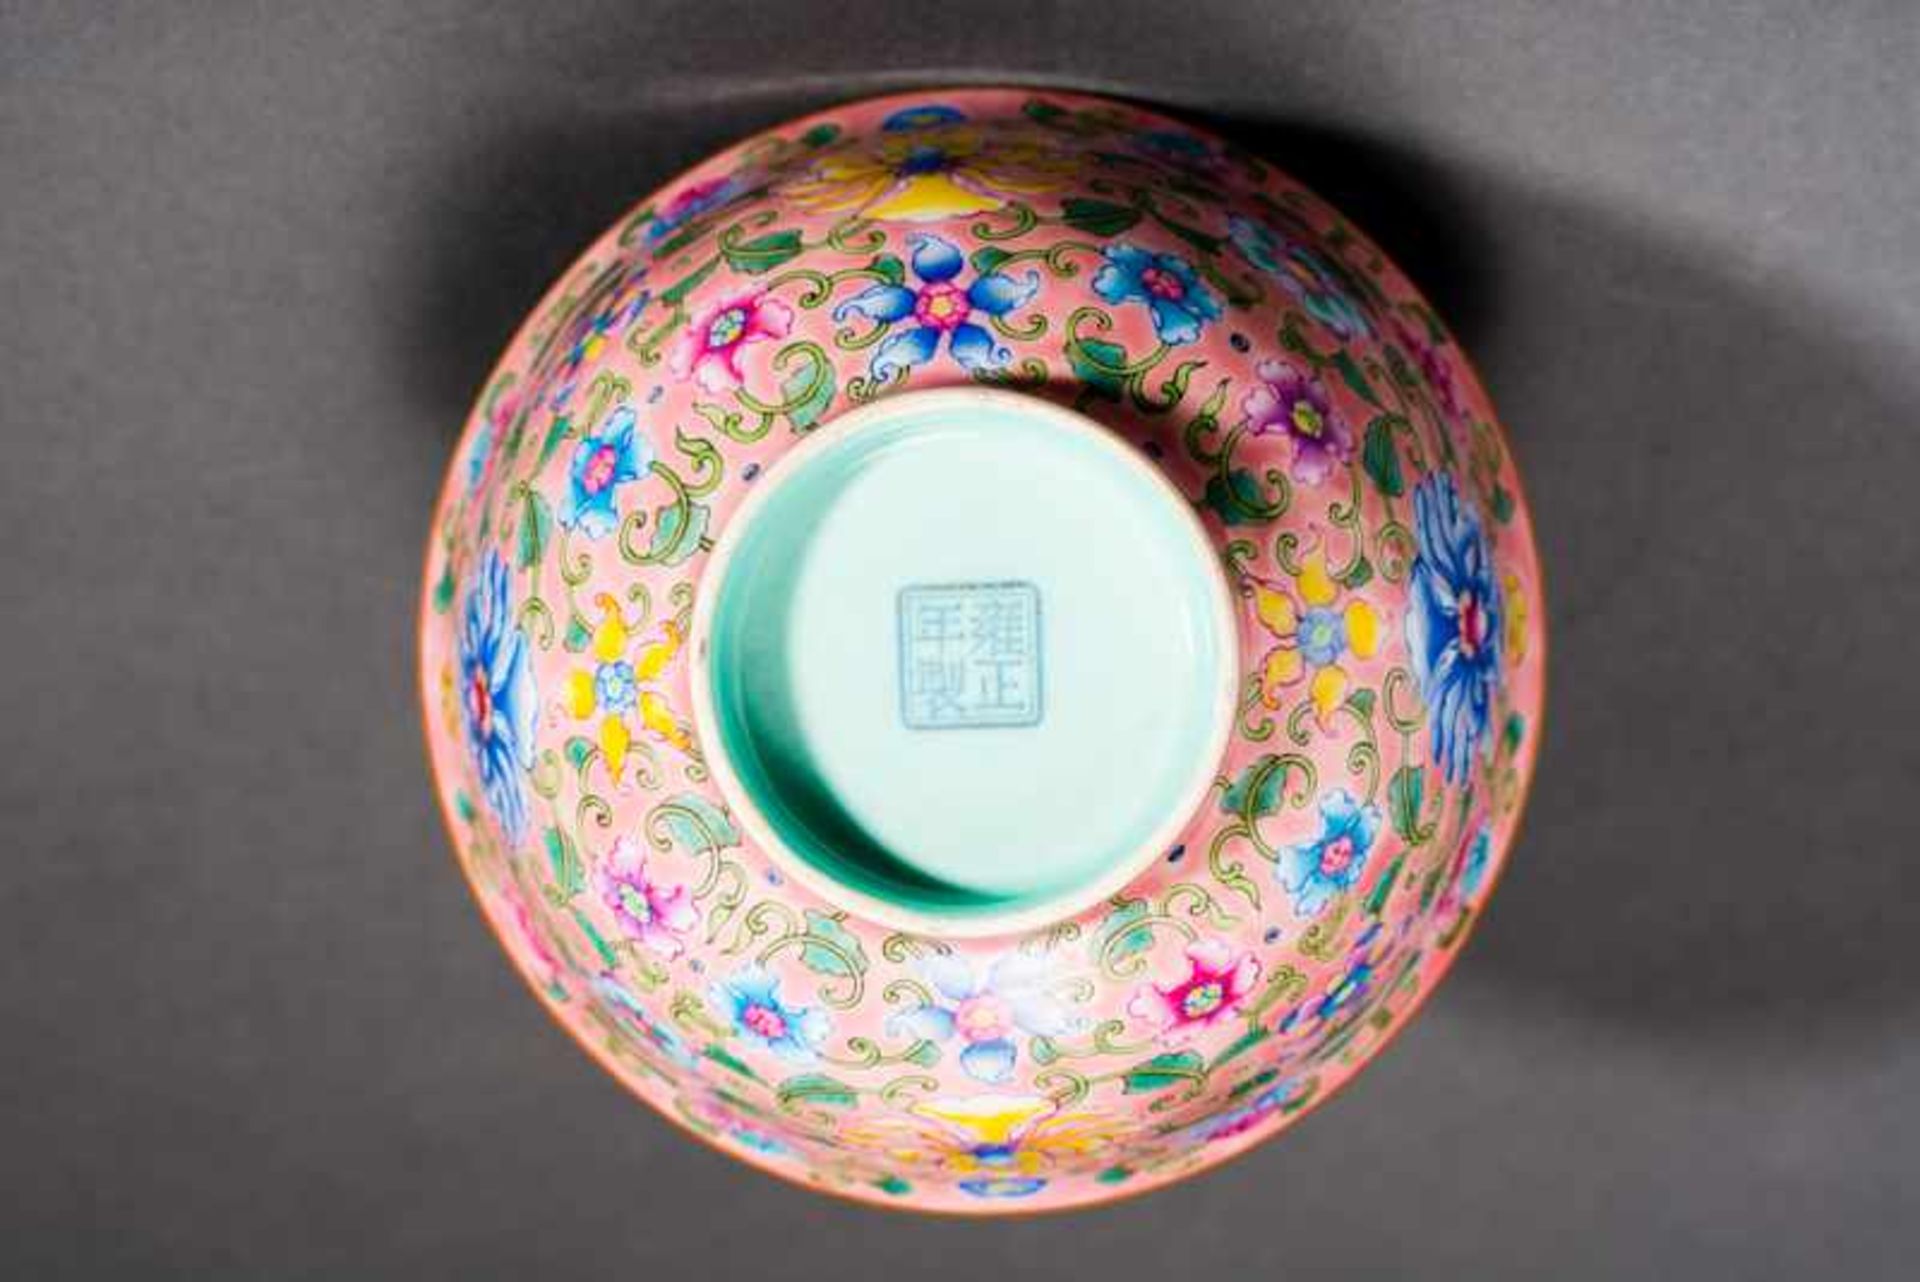 BOWL WITH LOTUS-BLOSSOM DECORATION Porcelain with enamel paint. China, Fine, curved walls, gilded - Image 4 of 5